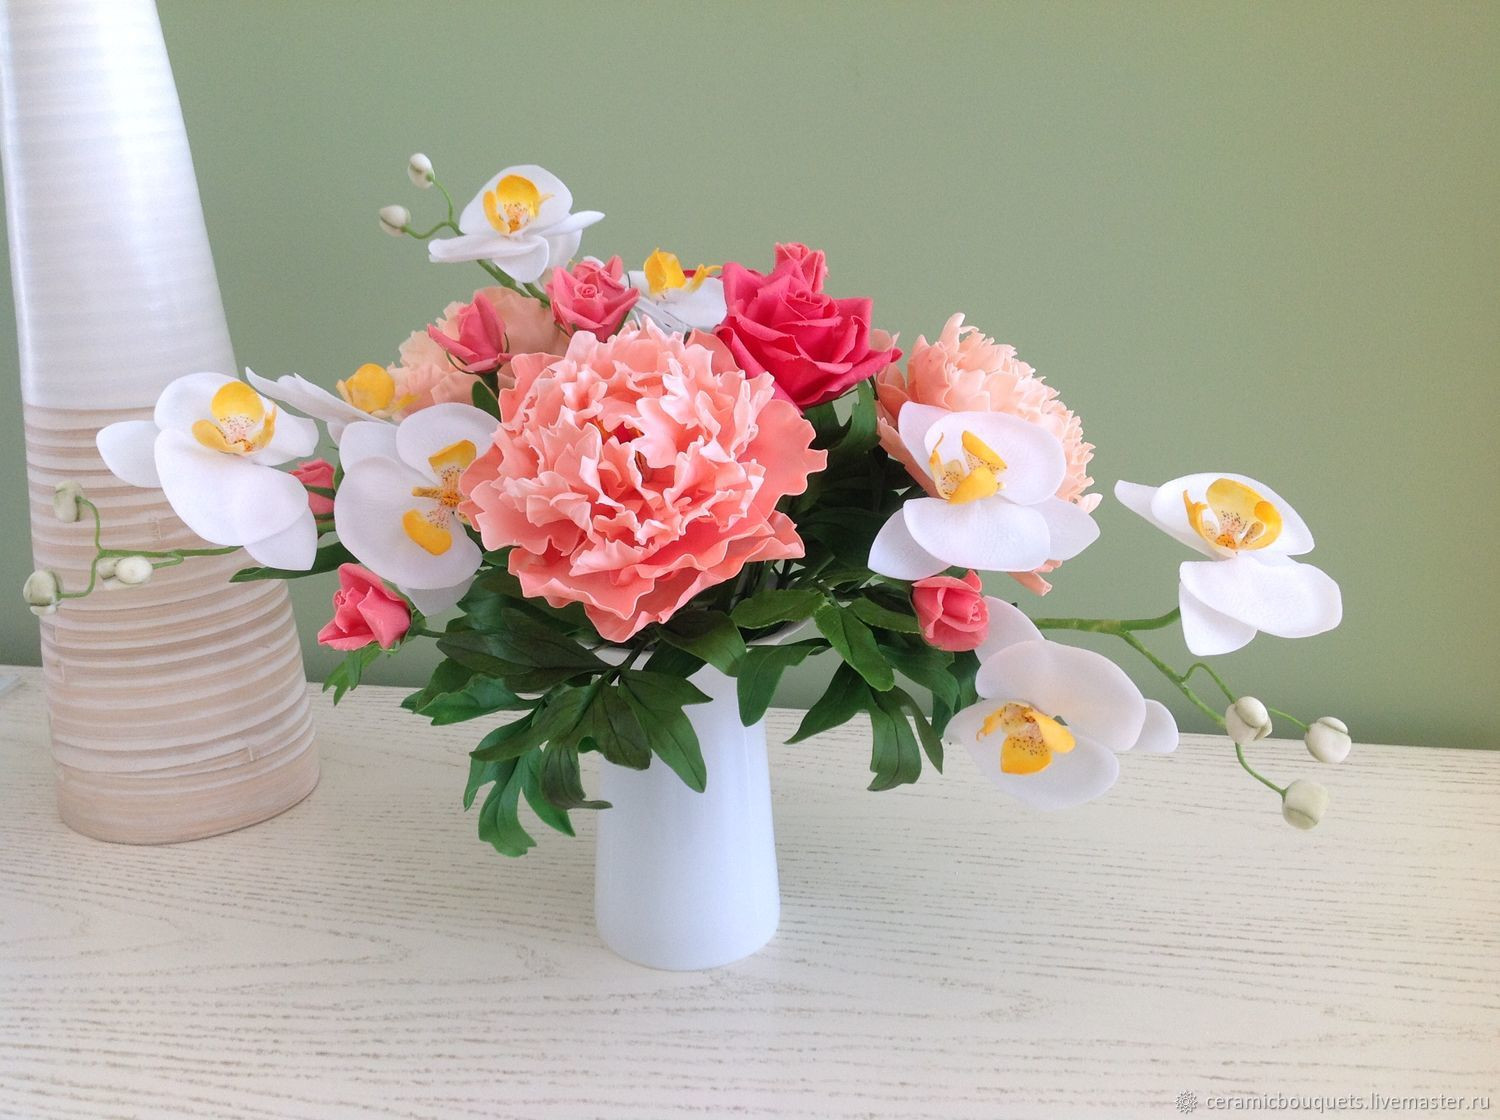 21 attractive Polymer Clay Vase 2024 free download polymer clay vase of bouquet of coral peonies with orchids shop online on livemaster for florist arrangements handmade livemaster handmade buy bouquet of coral peonies with orchids